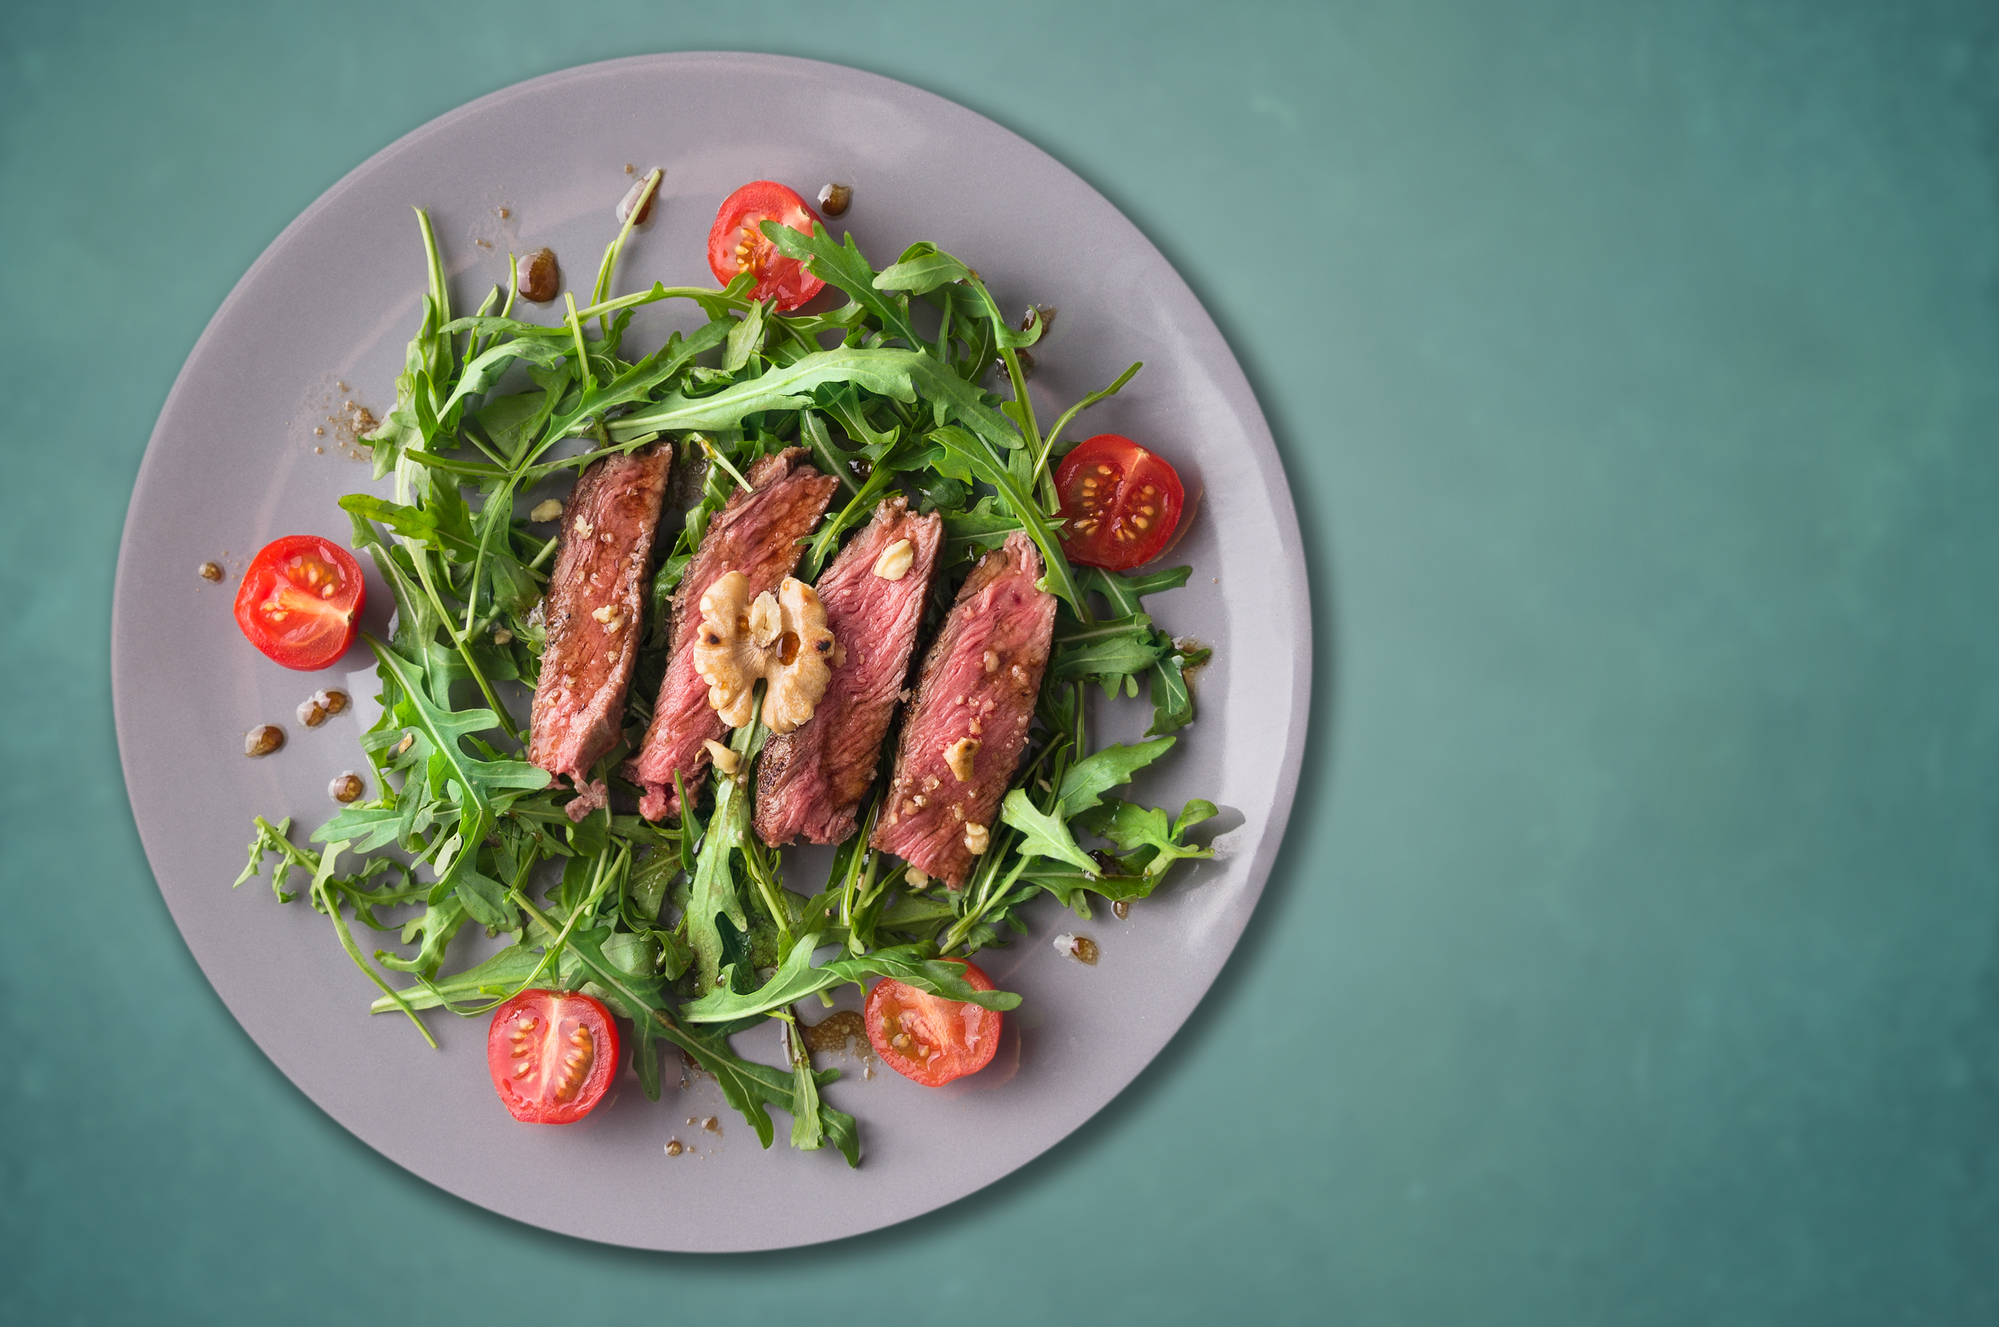 beef steak medium, Ruccola salad with tomatoes and walnuts,gray plate, blue background,copy space